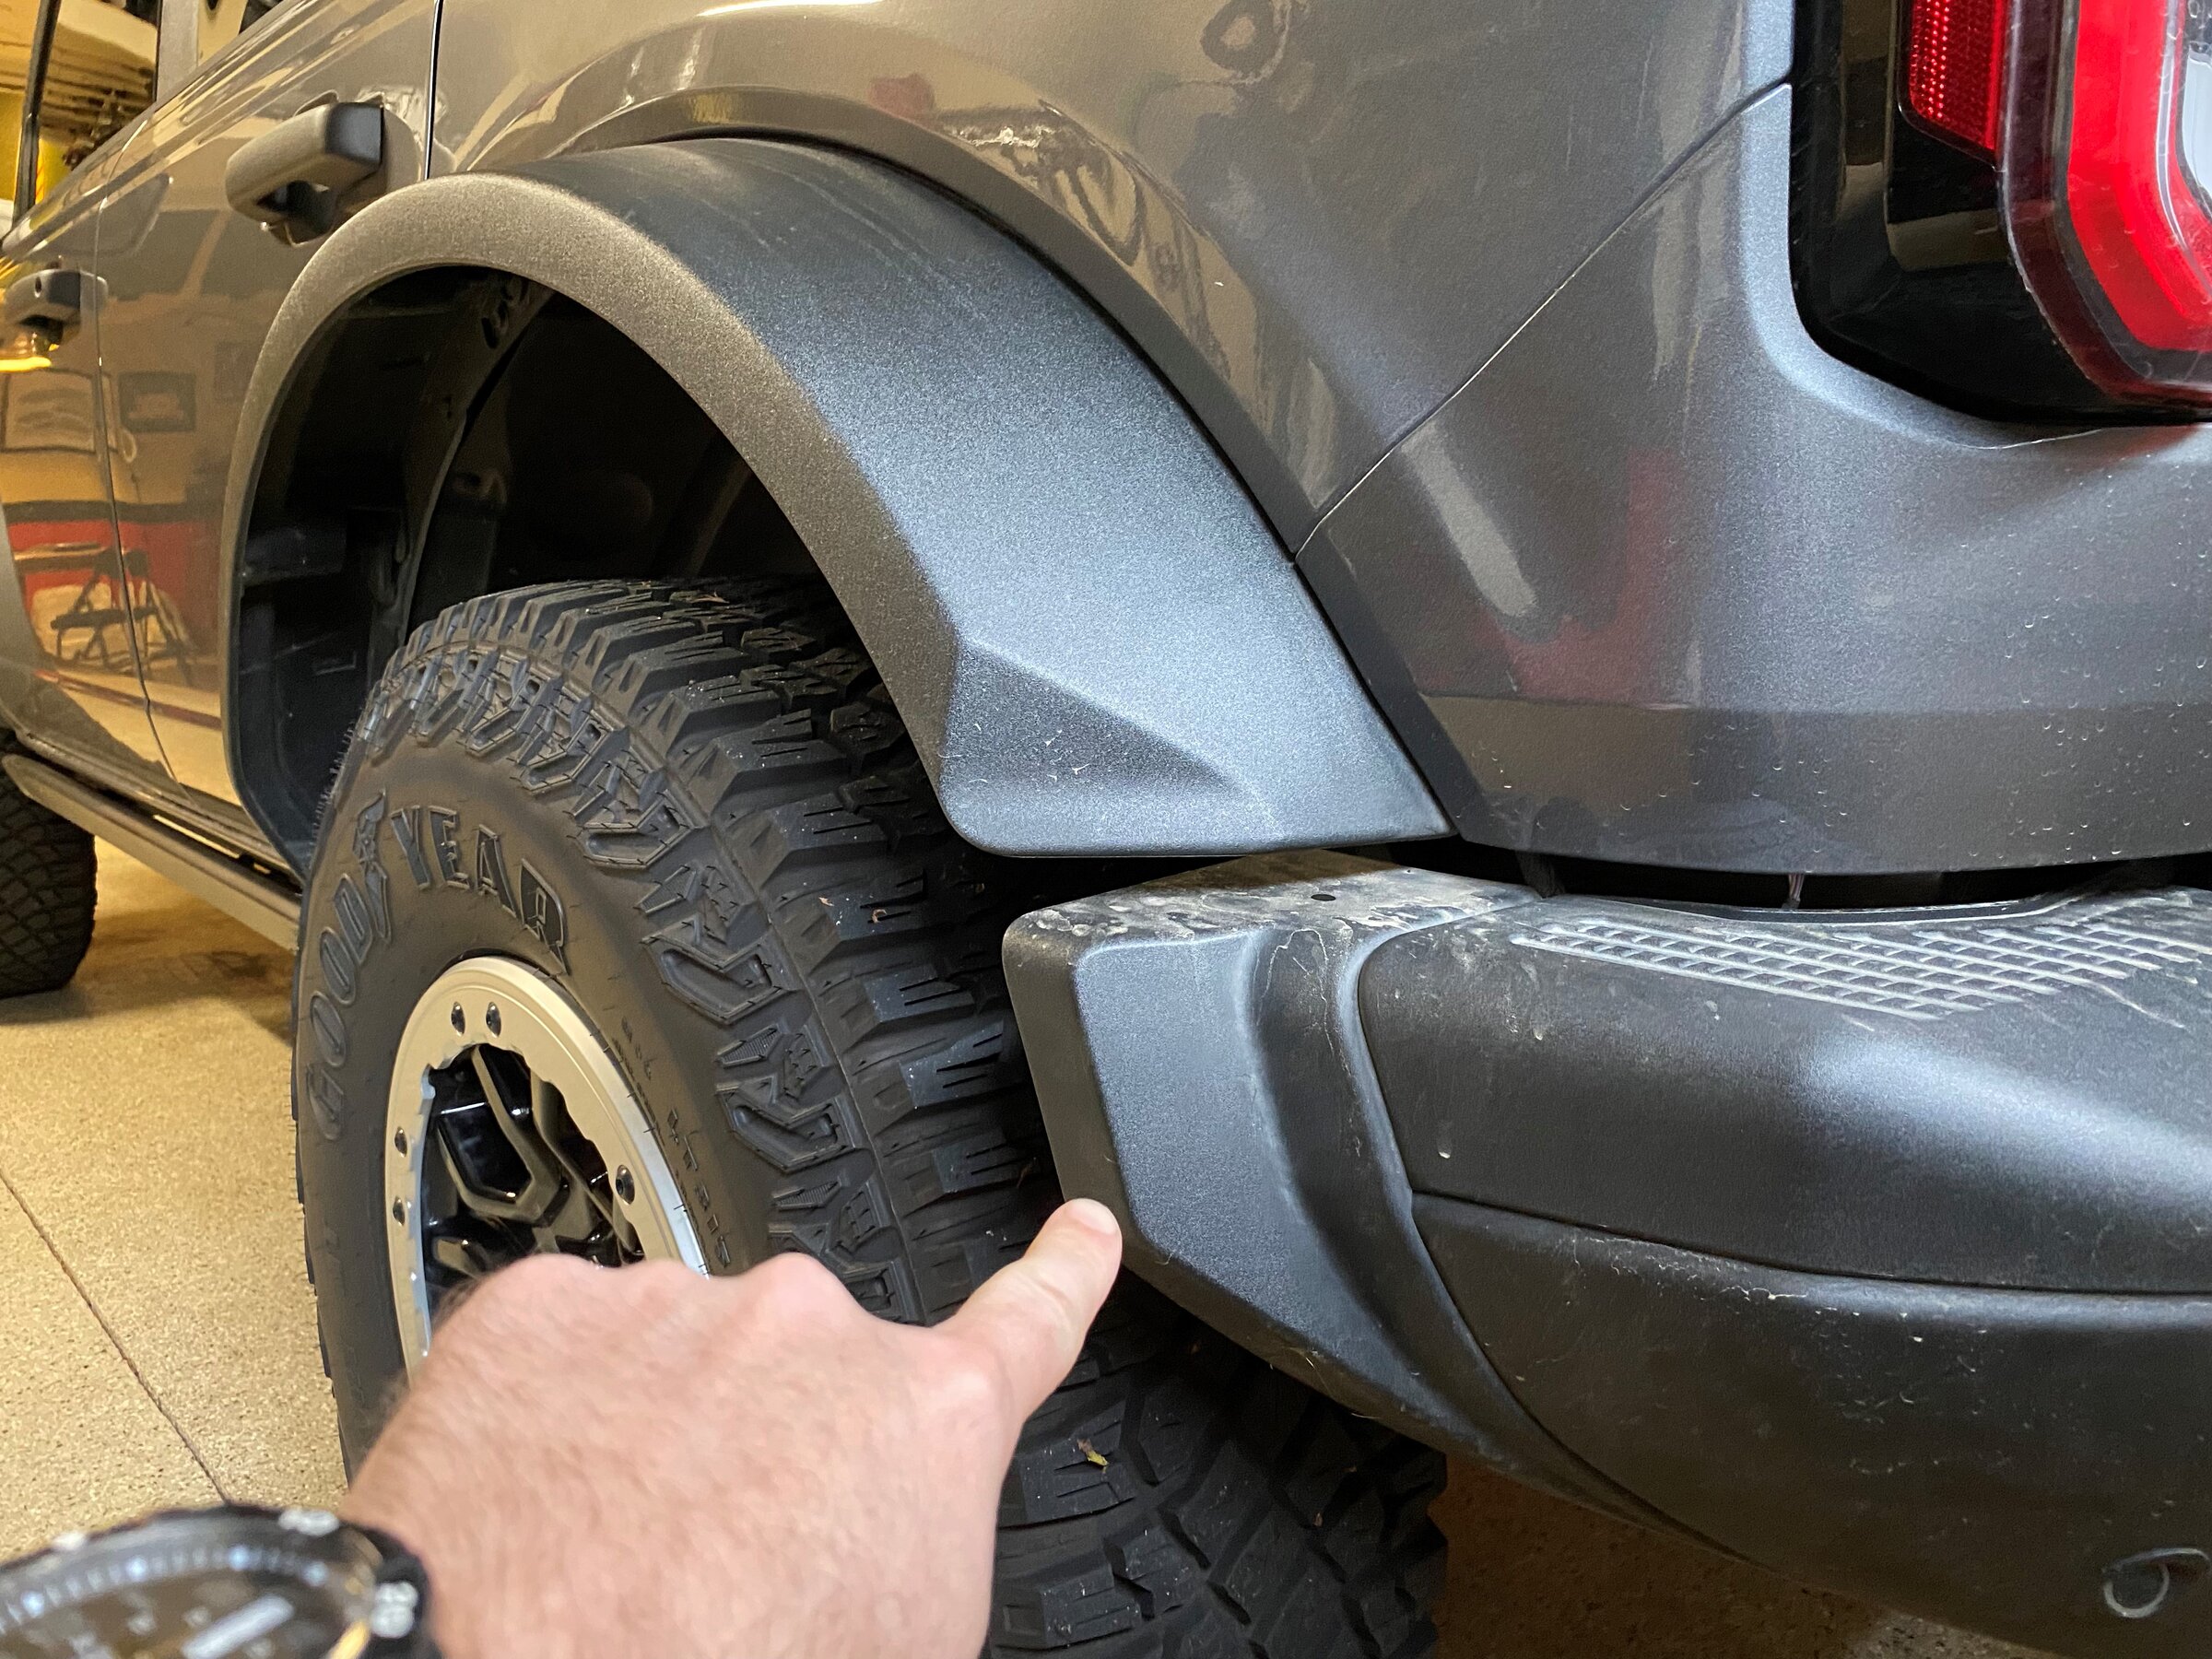 Ford Bronco How Standard Fenders Look Installed on a Sasquatch Bronco A79174AD-A742-4307-895F-41415118A64F